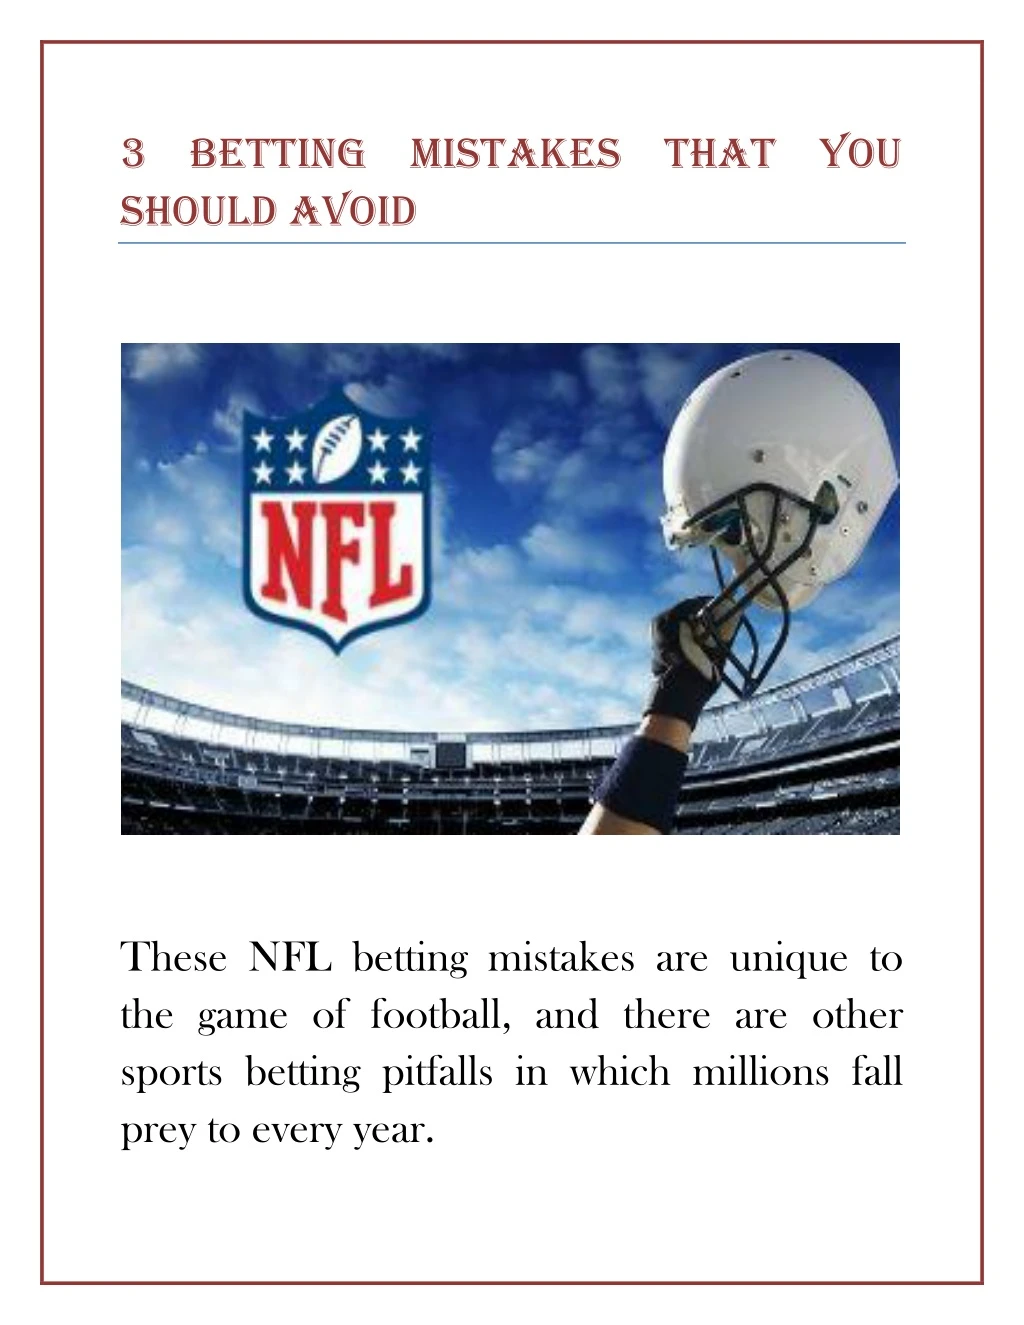 3 betting mistakes that you should avoid